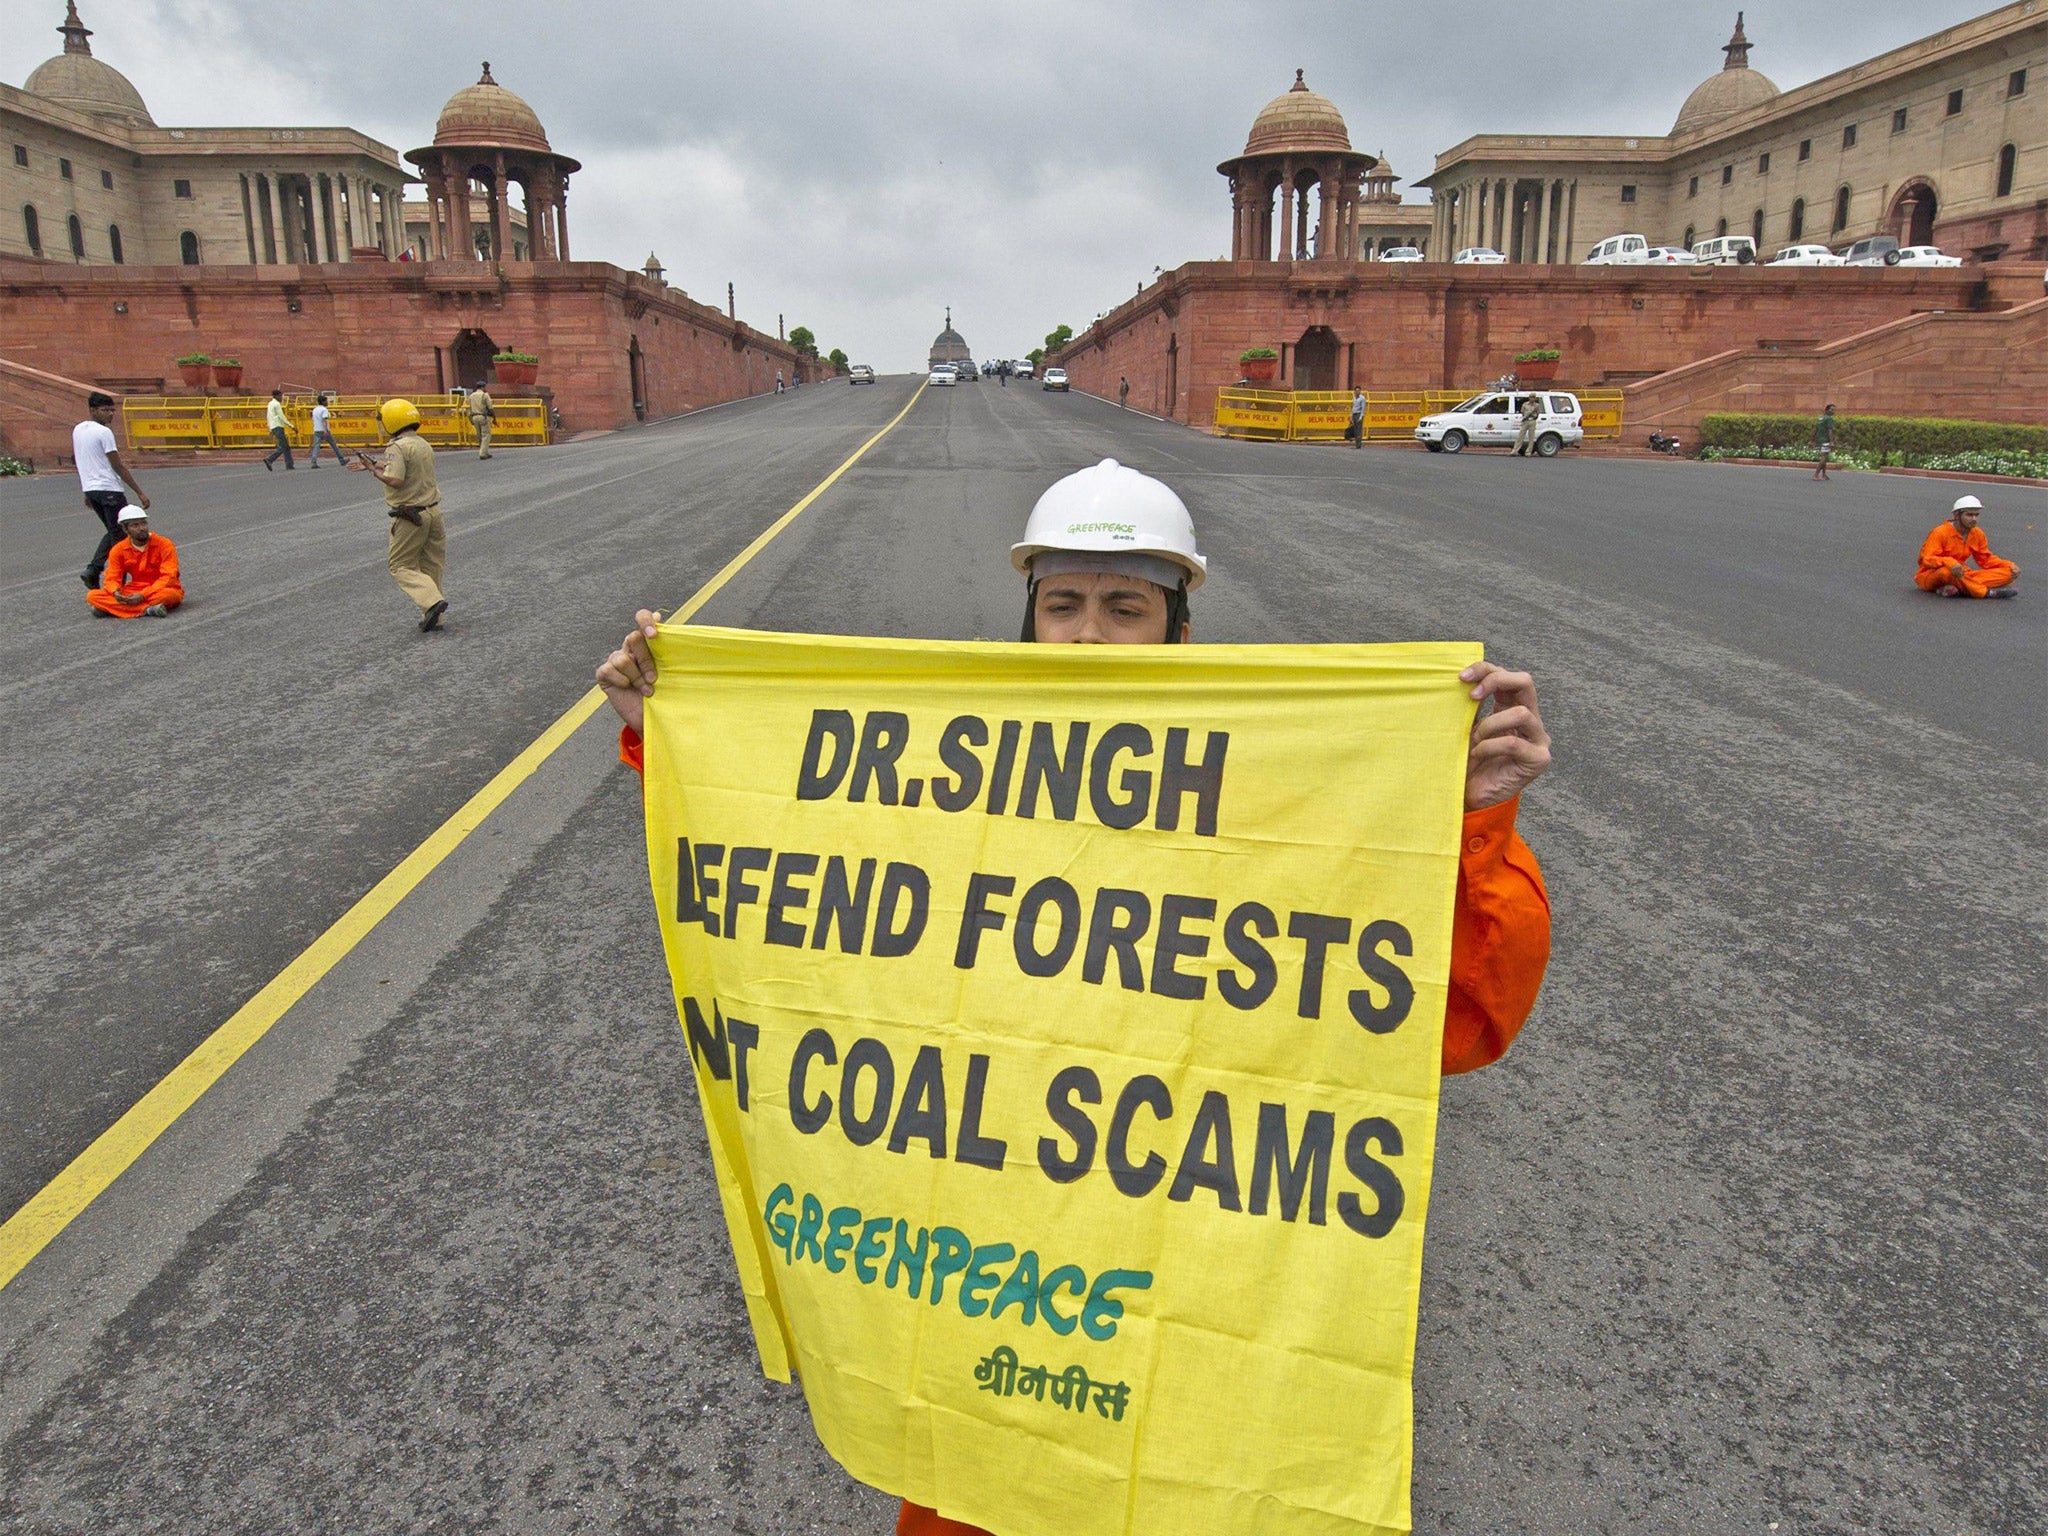 A Greenpeace activist holds a poster against alleged coal scams near the Indian Parliament in New Delhi